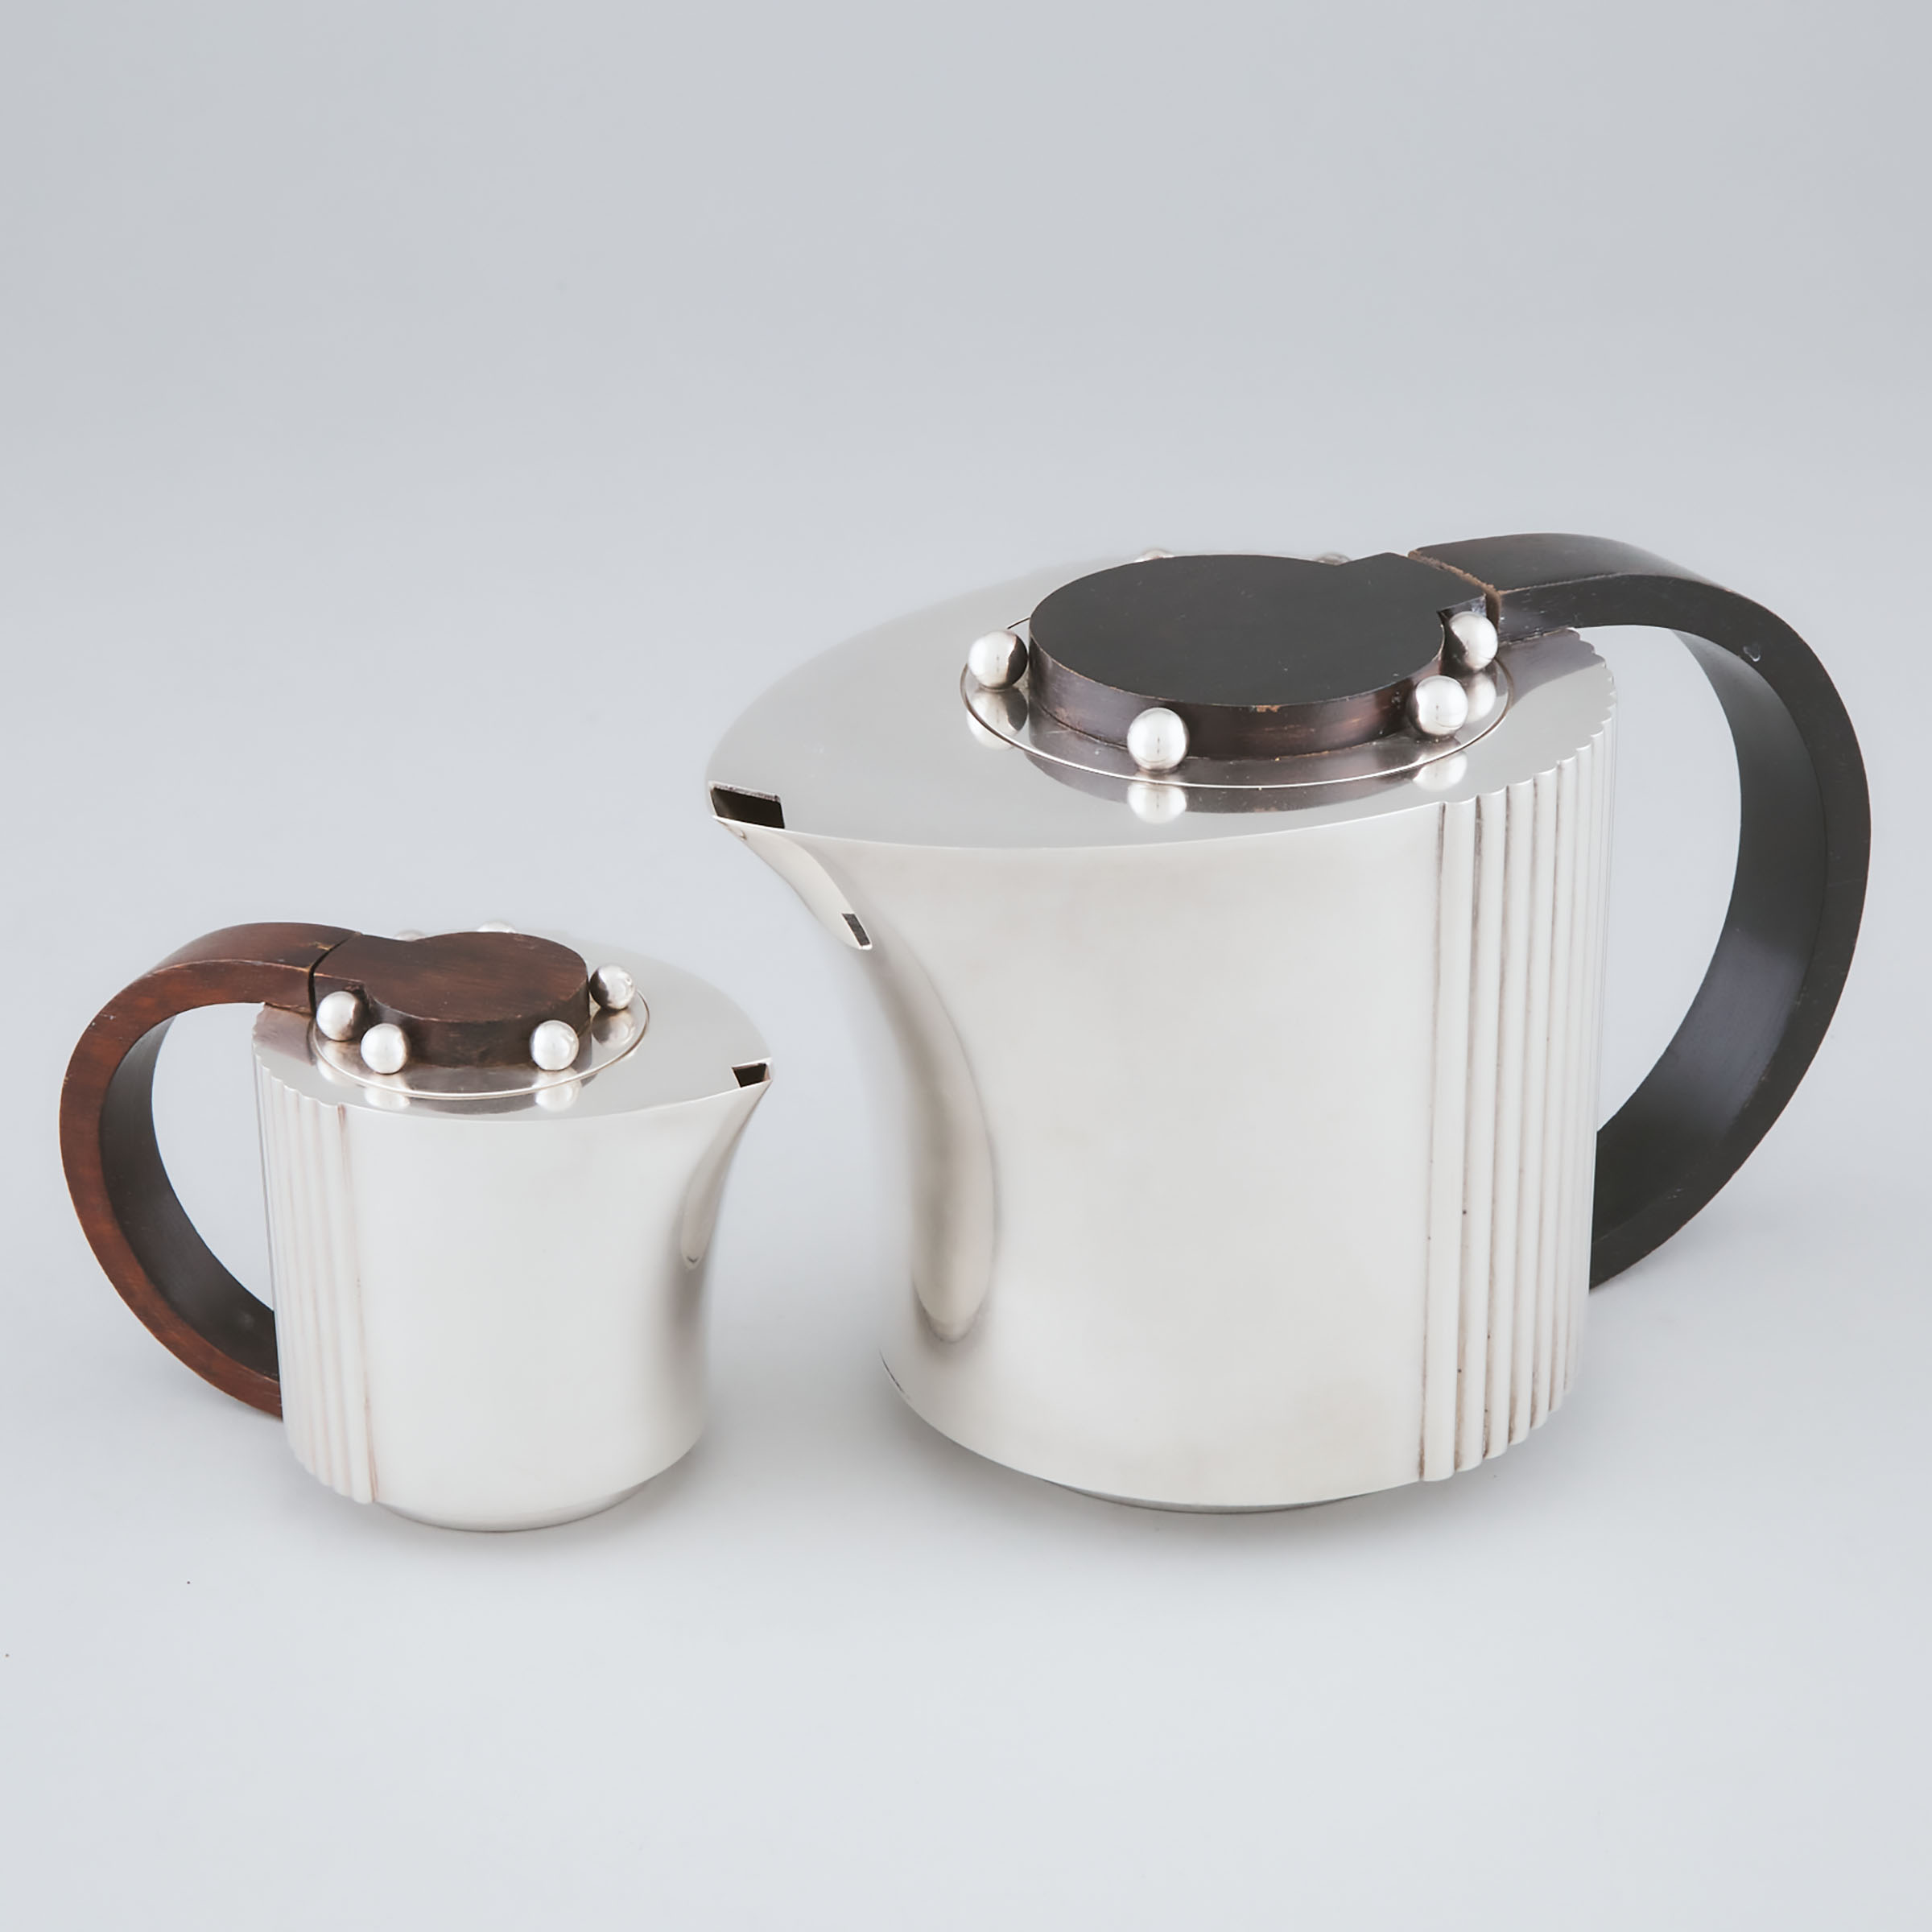 French Silver Plated 'Etchea' Teapot and Covered Cream Jug, Jean Puiforcat, 20th century